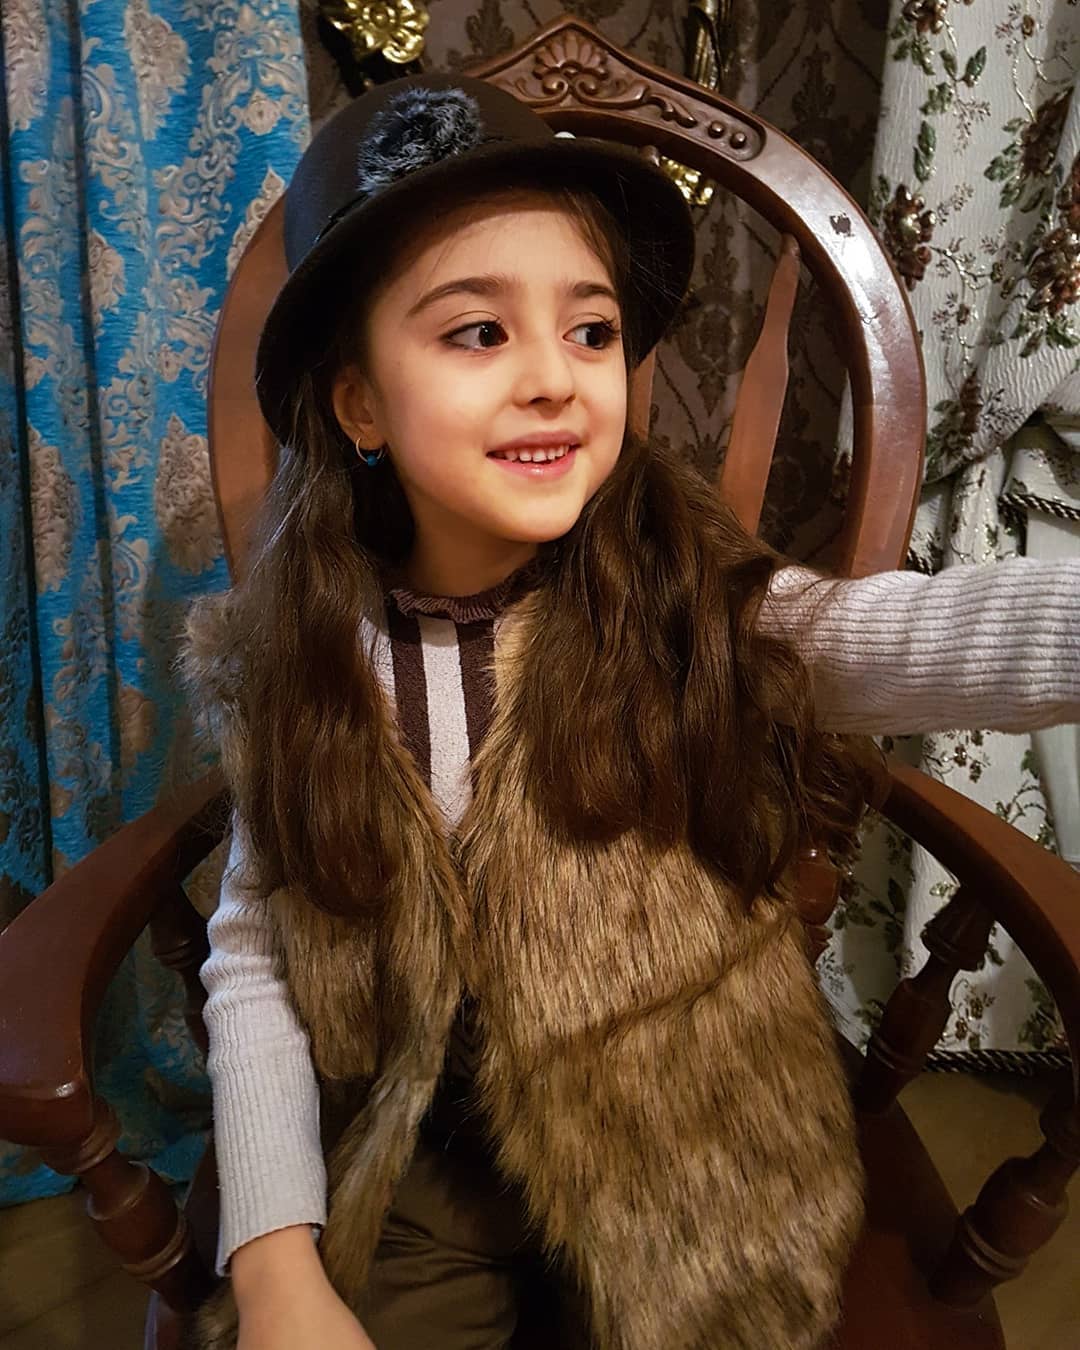 Meet Mahdis Mohammadi, The 7-Year-Old Iranian Girl Who Became An Internet Star For Her Exceptional Beauty